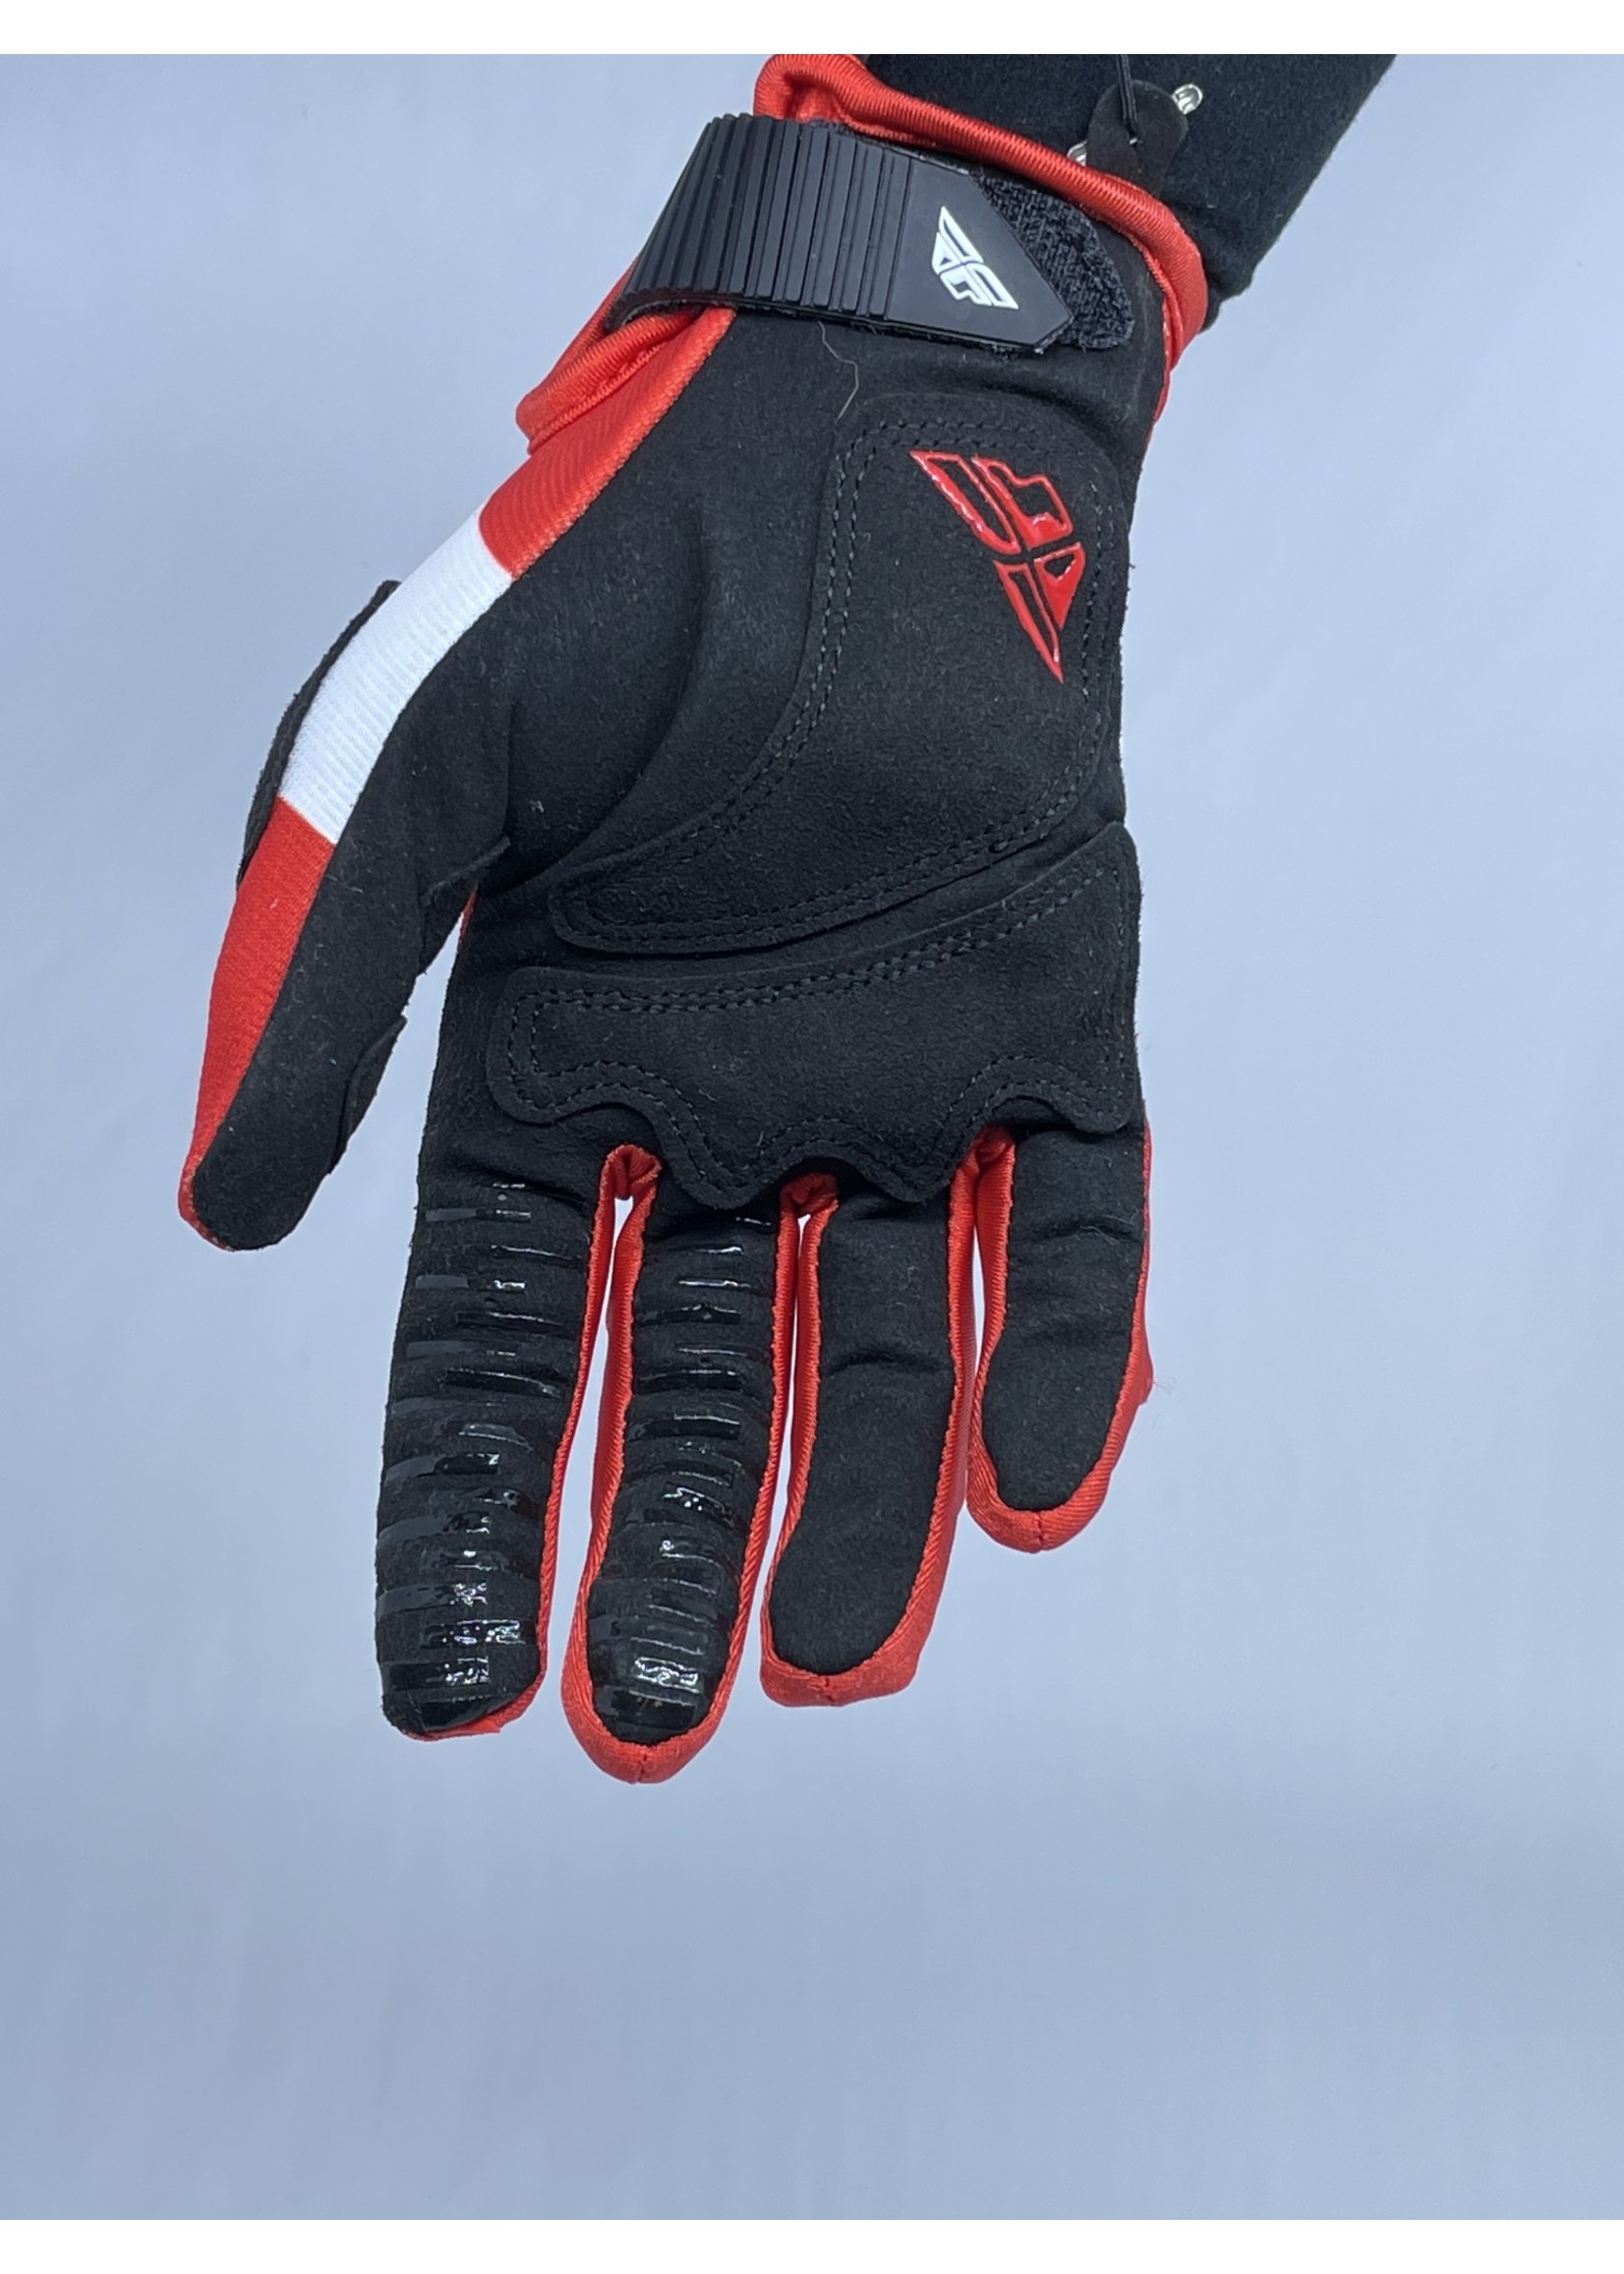 Fly Racing KINETIC SHIELD GLOVES gant rouge blanc  RED/WHITE SZ 07 s-7